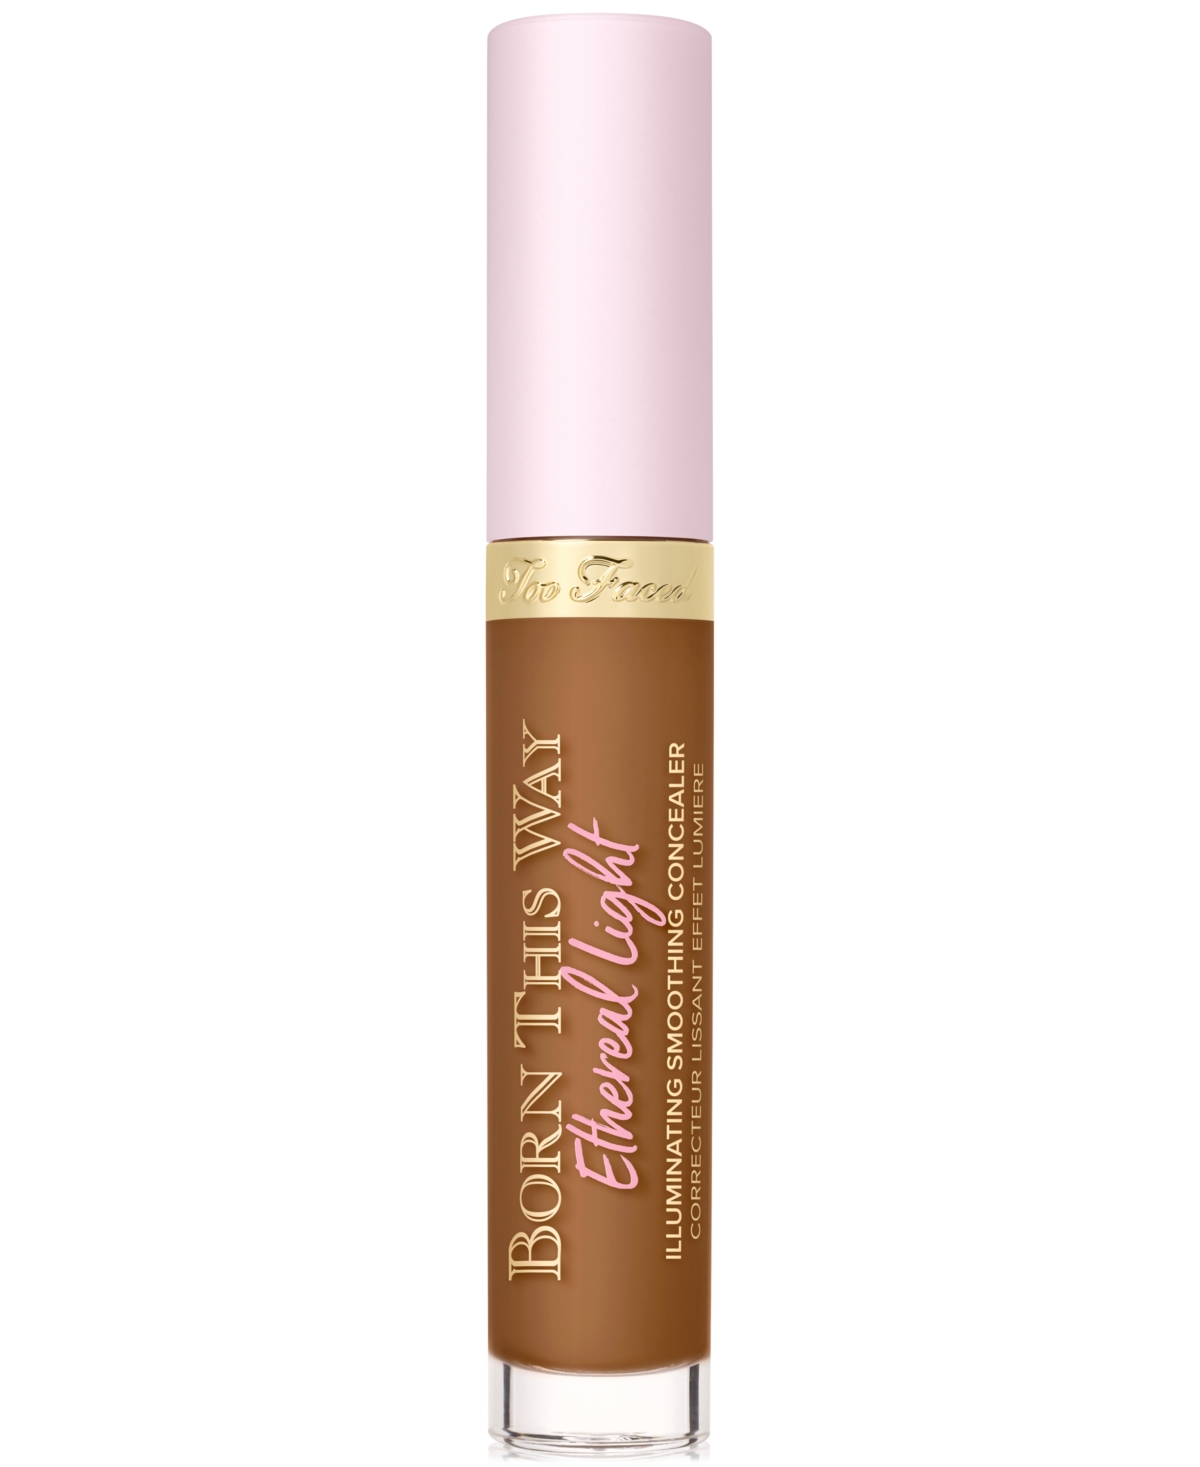 Too Faced Born This Way Ethereal Light Illuminating Smoothing Concealer In Chocolate Truffle - Deep With Neutral Un